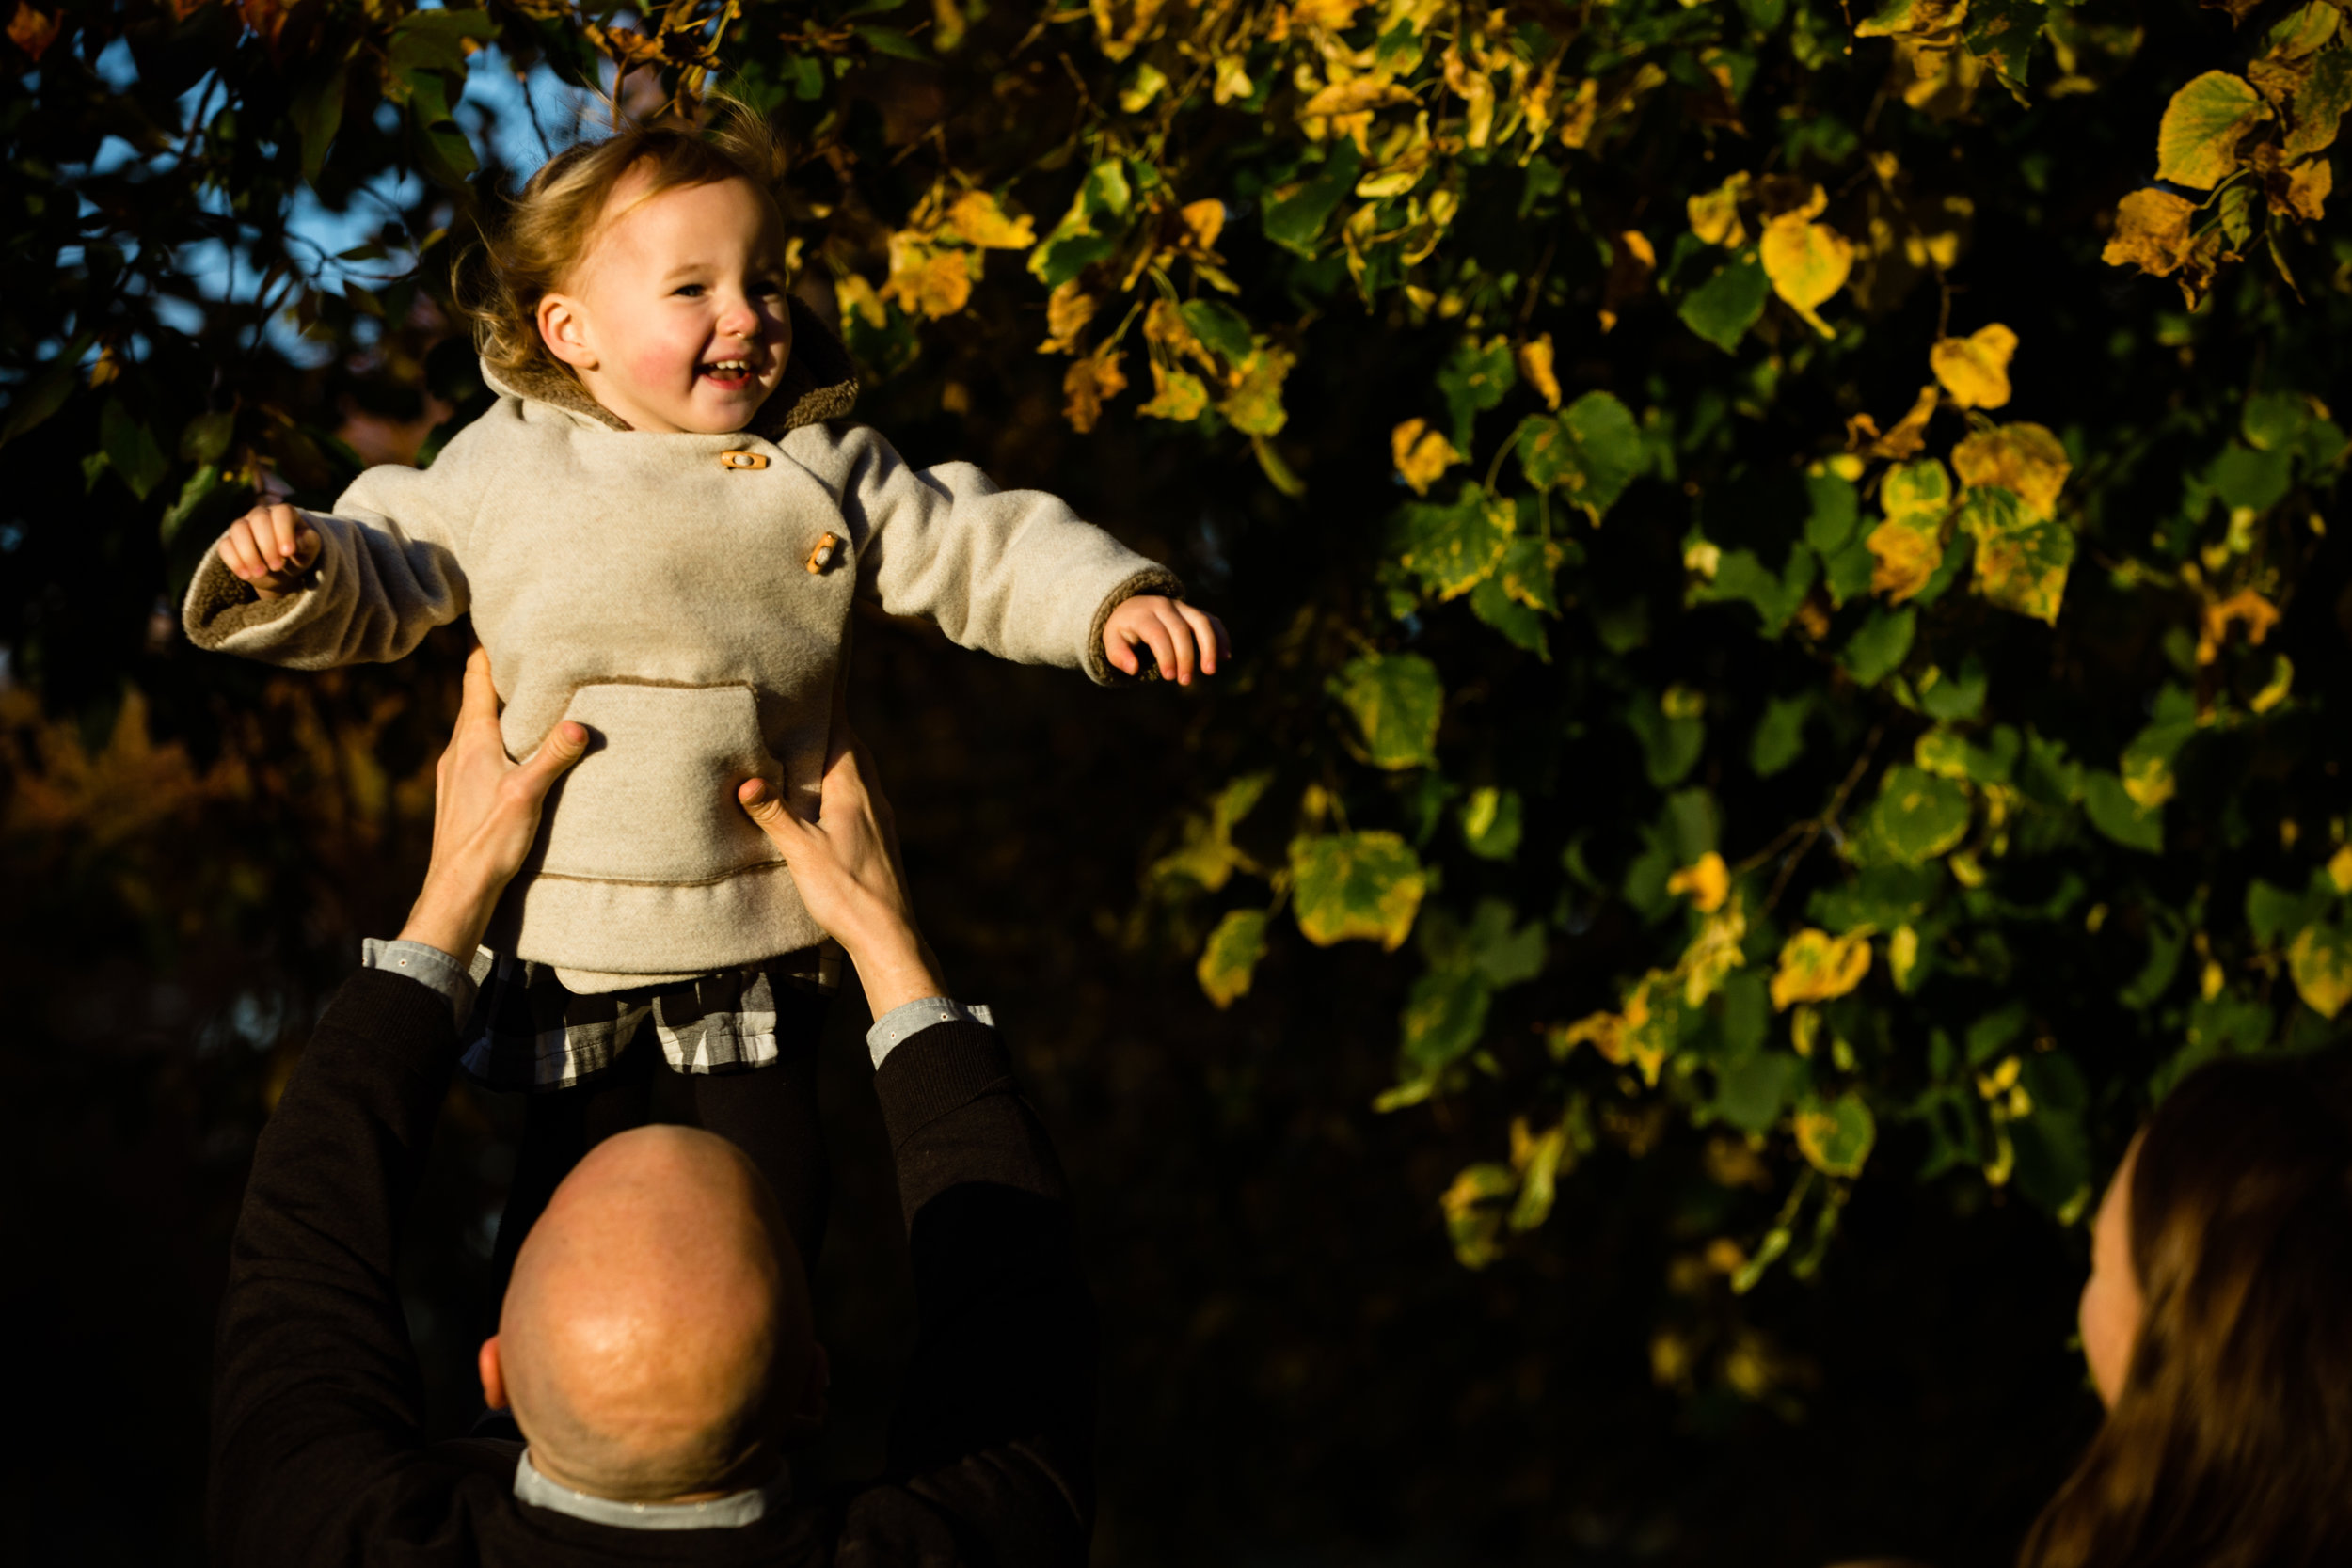 father holds sun lit daughter up in the air in photograph